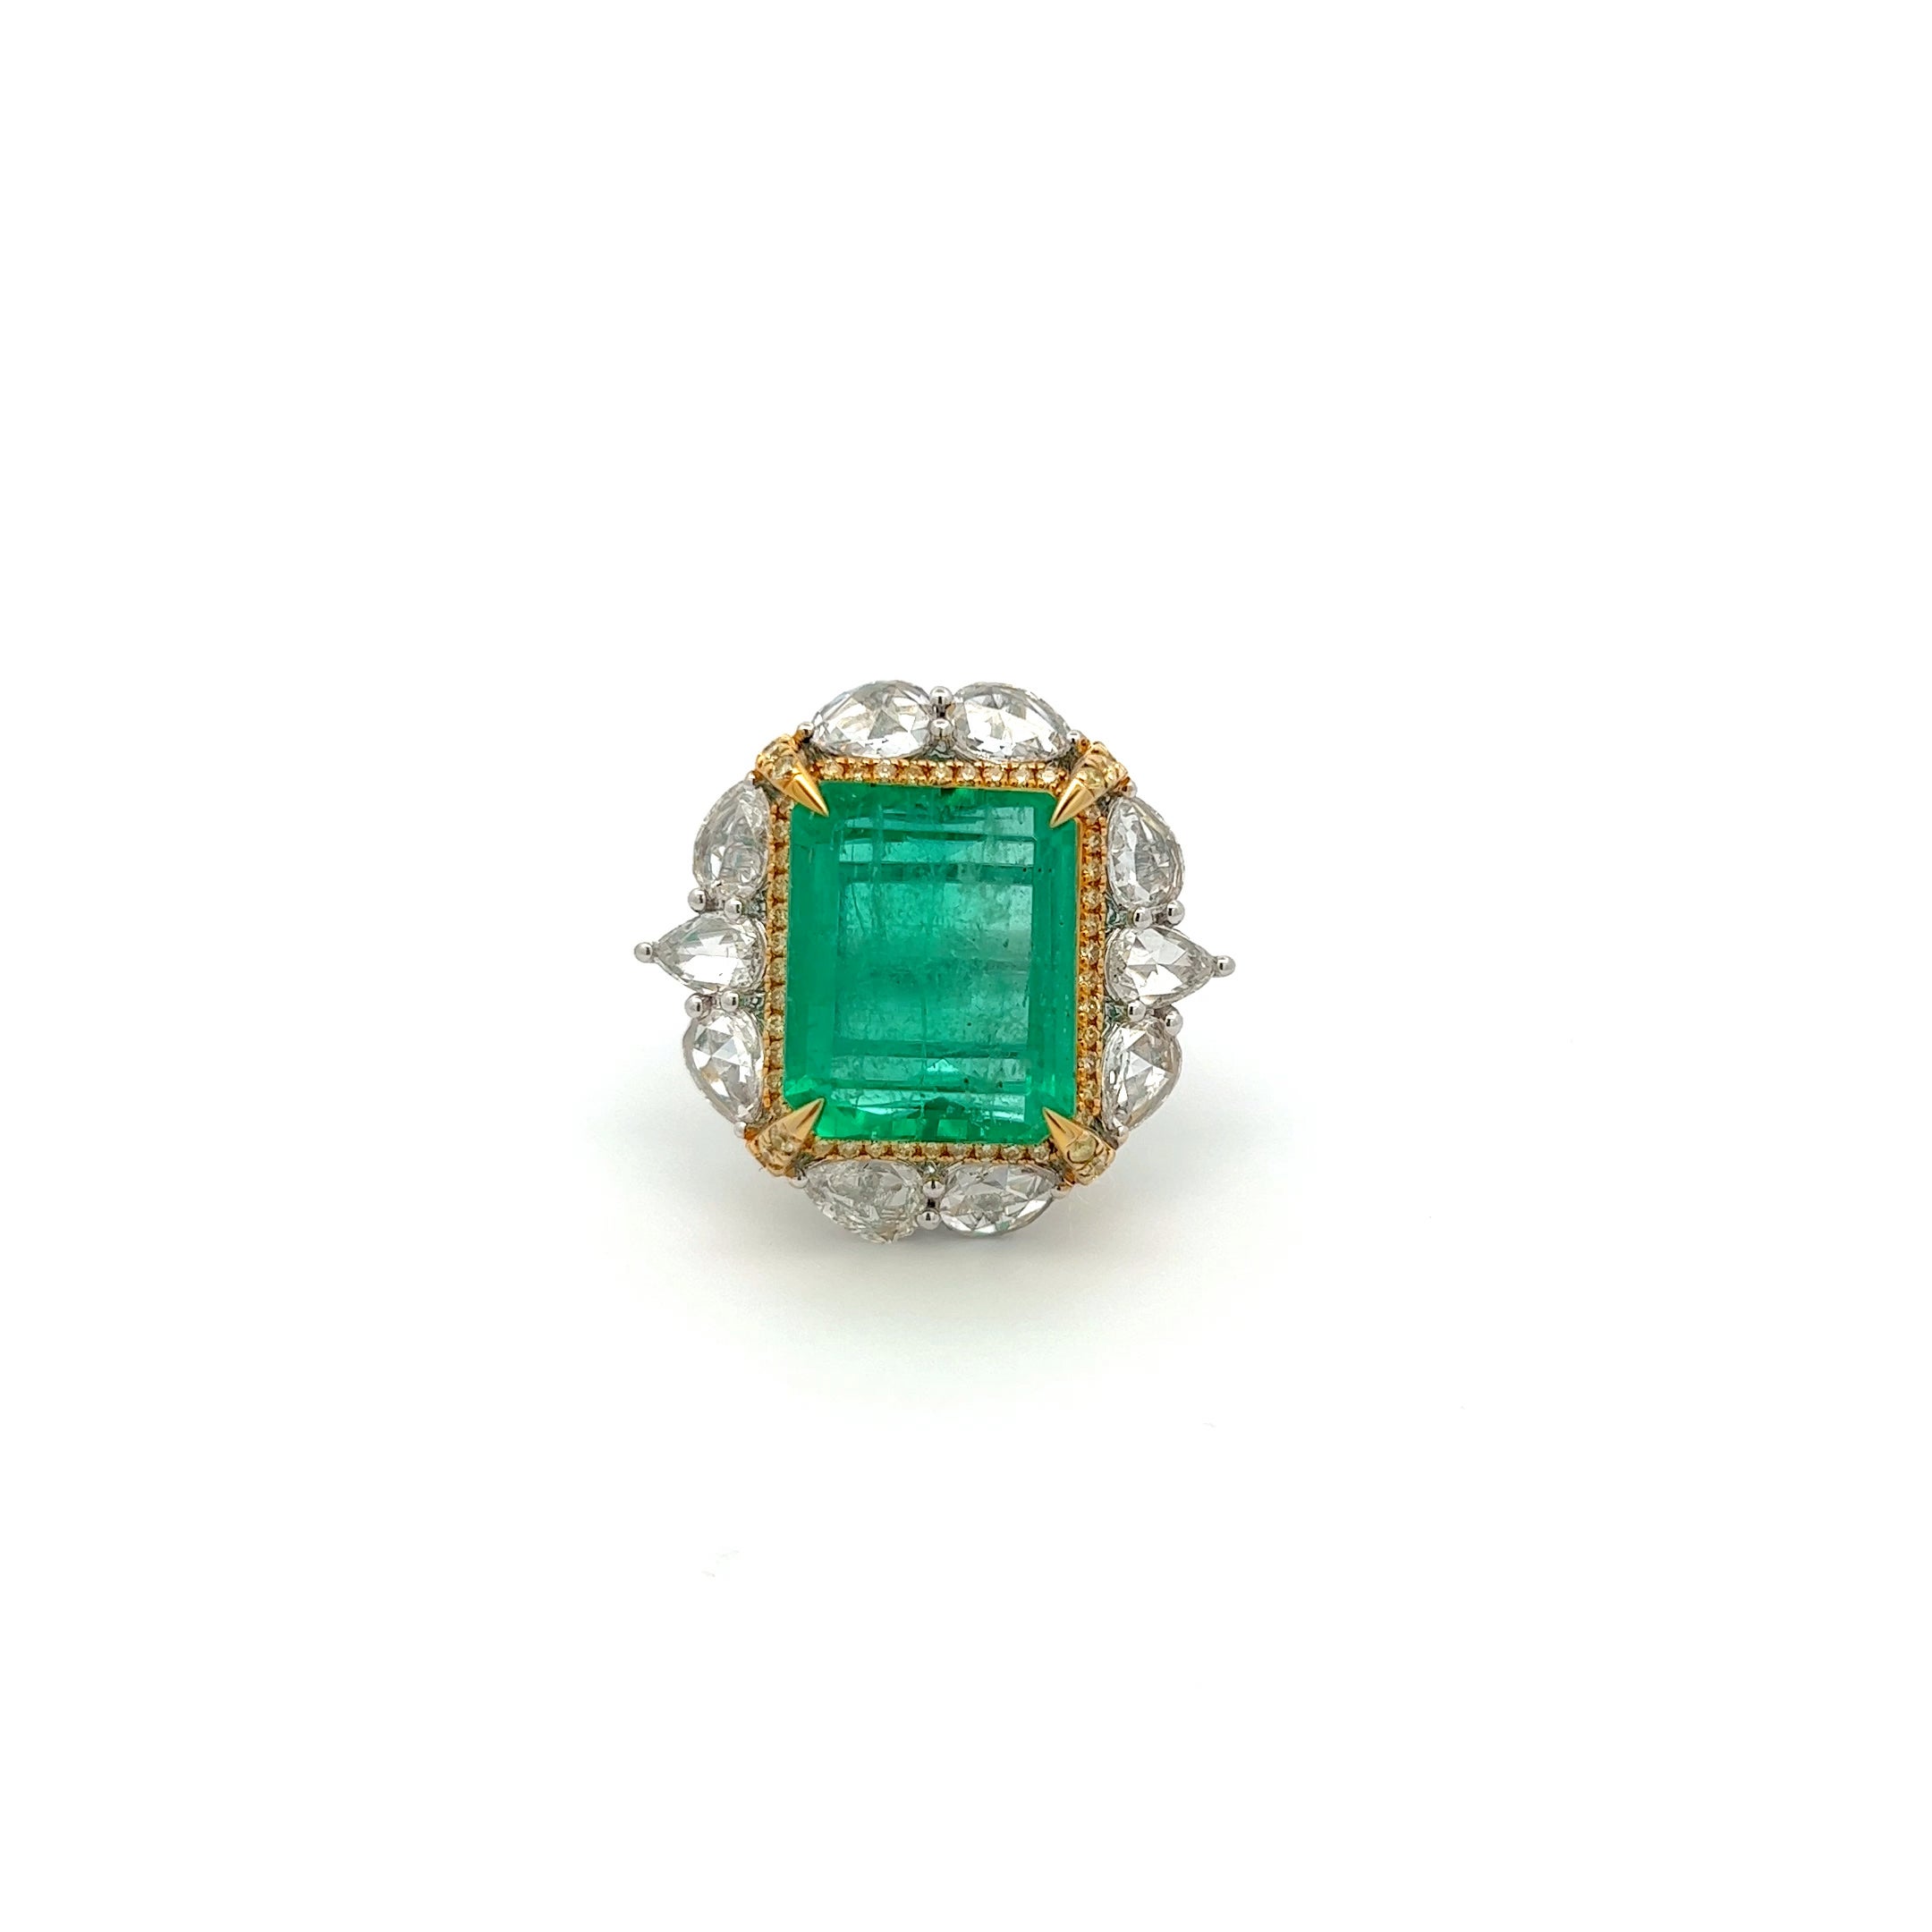 Introducing our stunning GIA certified 10.15 carat Colombian Emerald Ring in 18K Two-tone Gold, accented with 2.73 carats of pear-shaped rose-cut diamonds. This exquisite ring boasts a rare and highly sought-after Colombian emerald, renowned for its